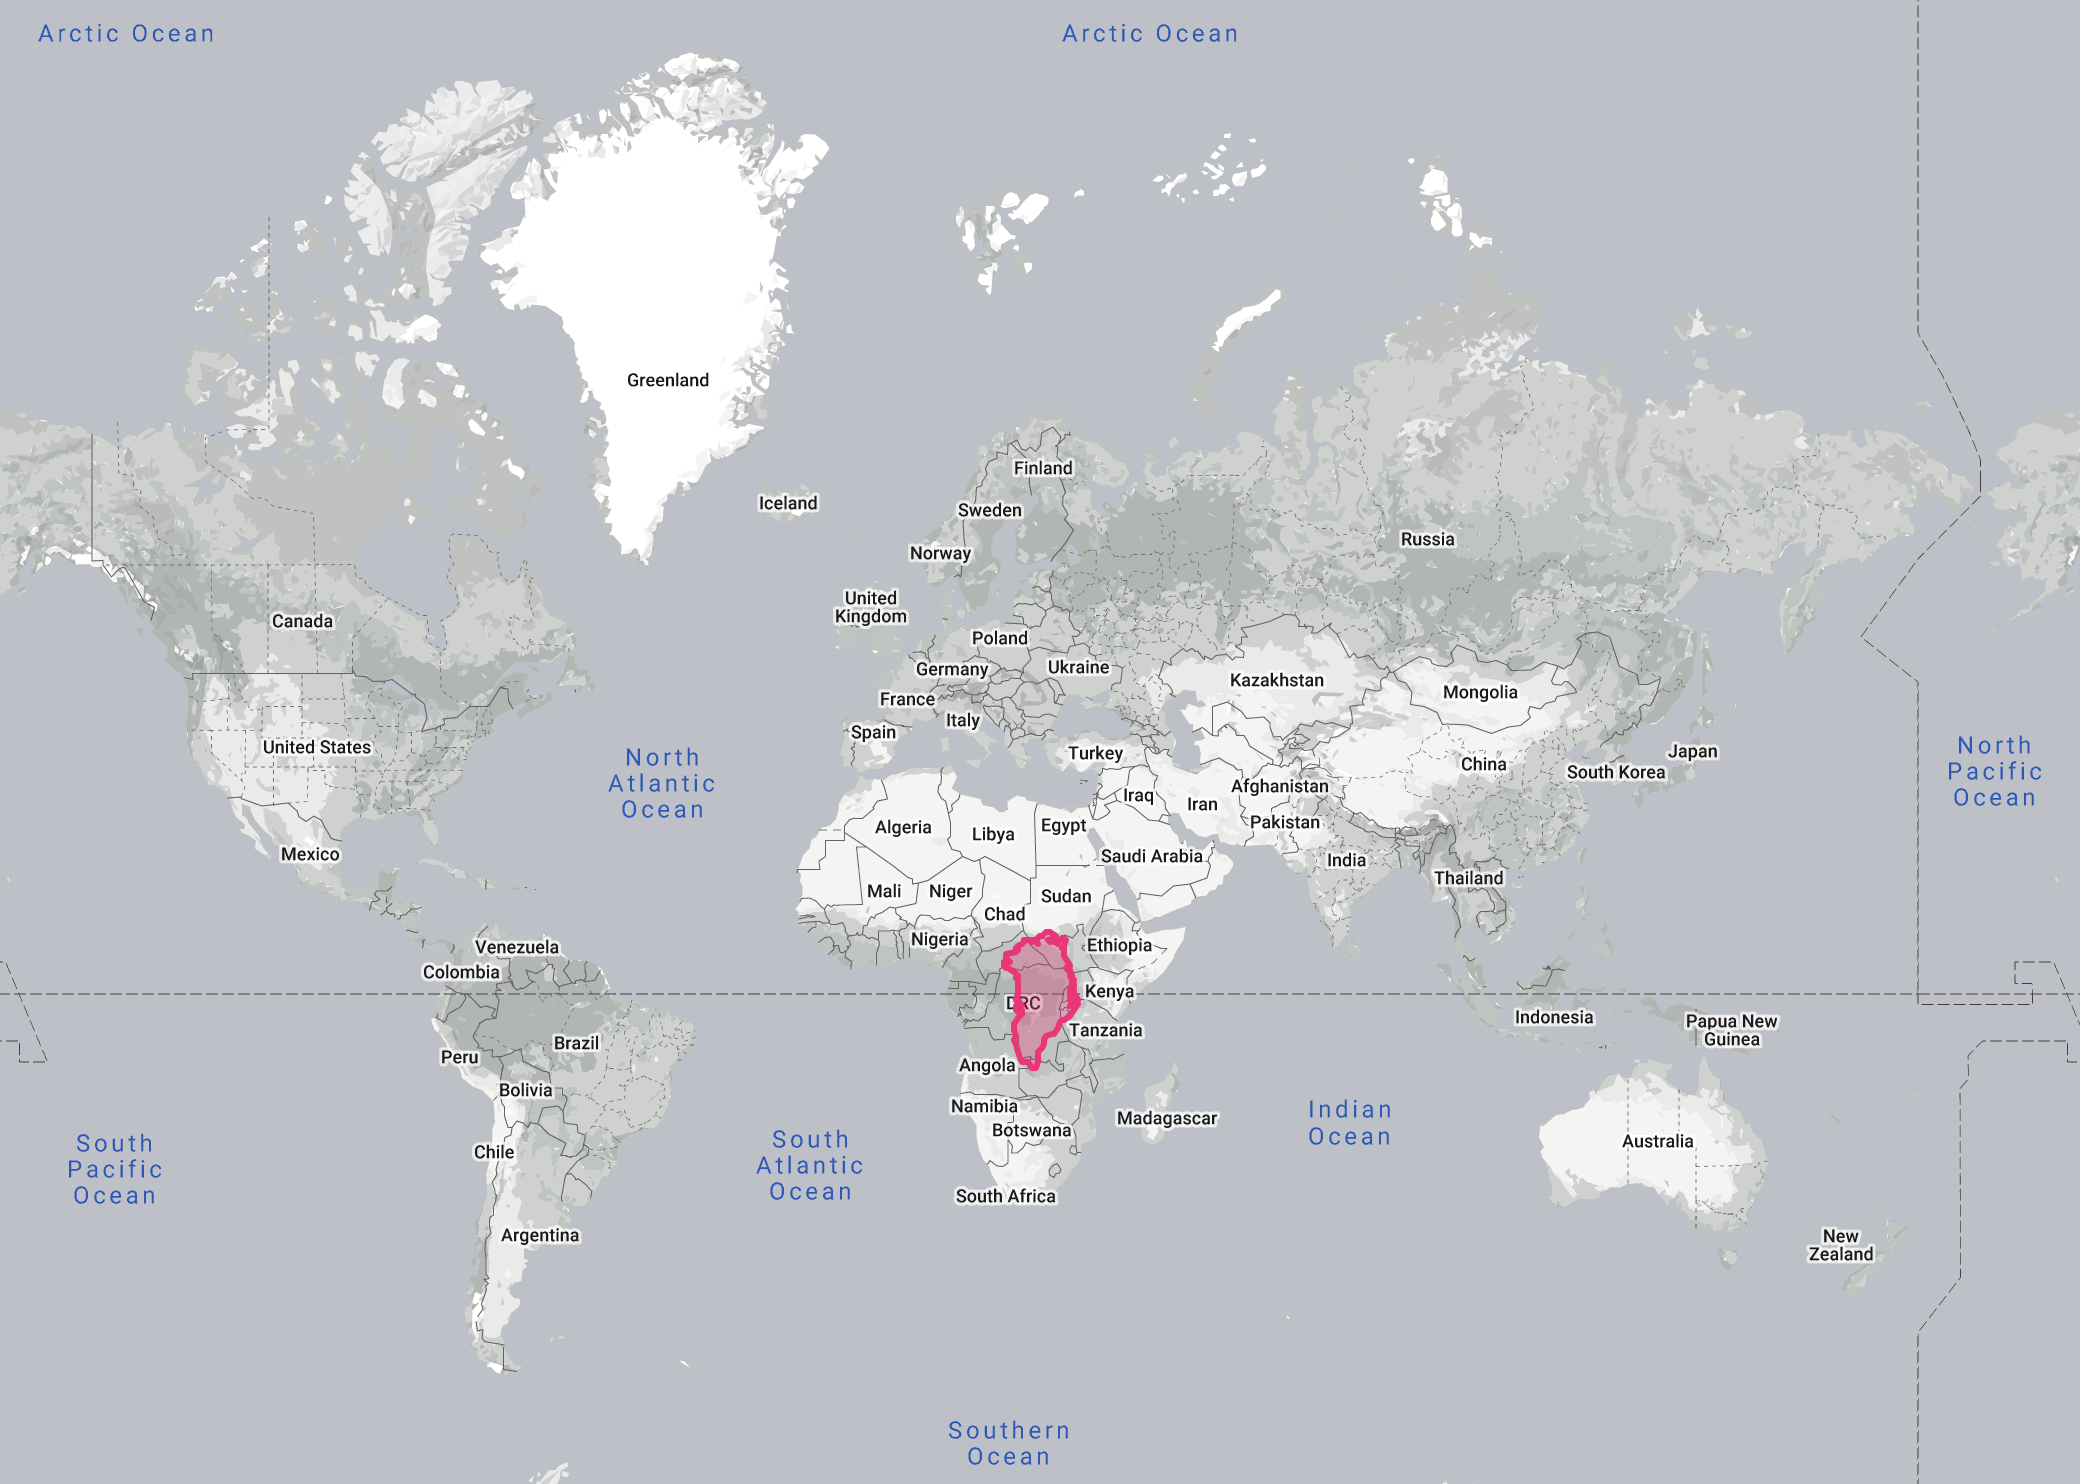 The same map as above, but with Greenland moved to the equator and shrunken to its real size